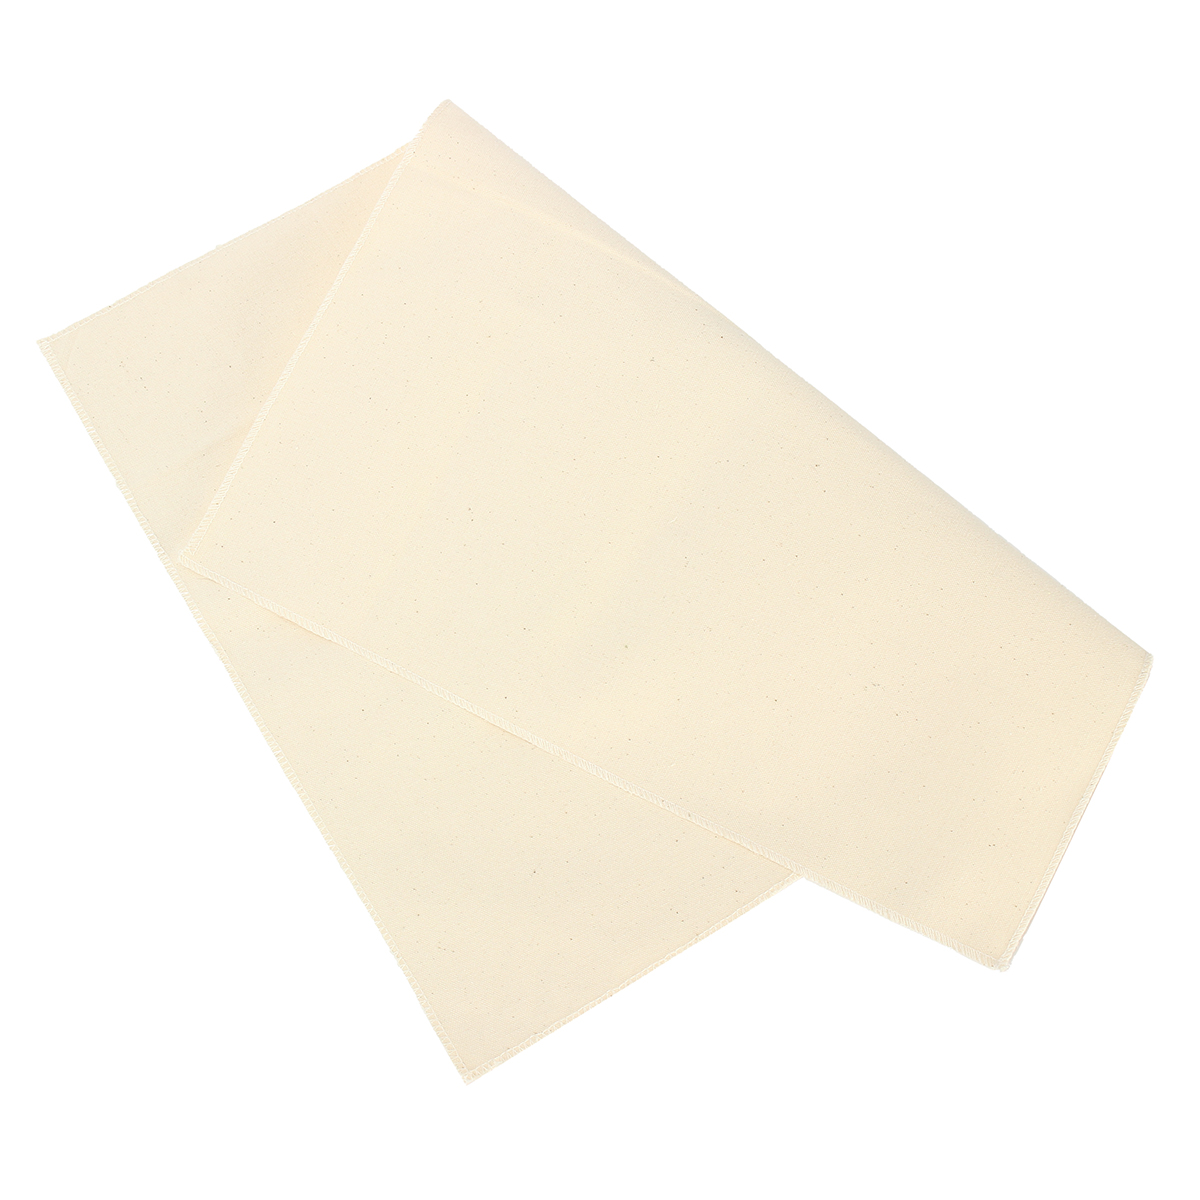 Flax-Liner-Cloth-Fiber-Cloth-Bakers-Proofing-Couche-for-Proving-Bread-Pans-Kitchen-Tool-Fermentation-1141080-3